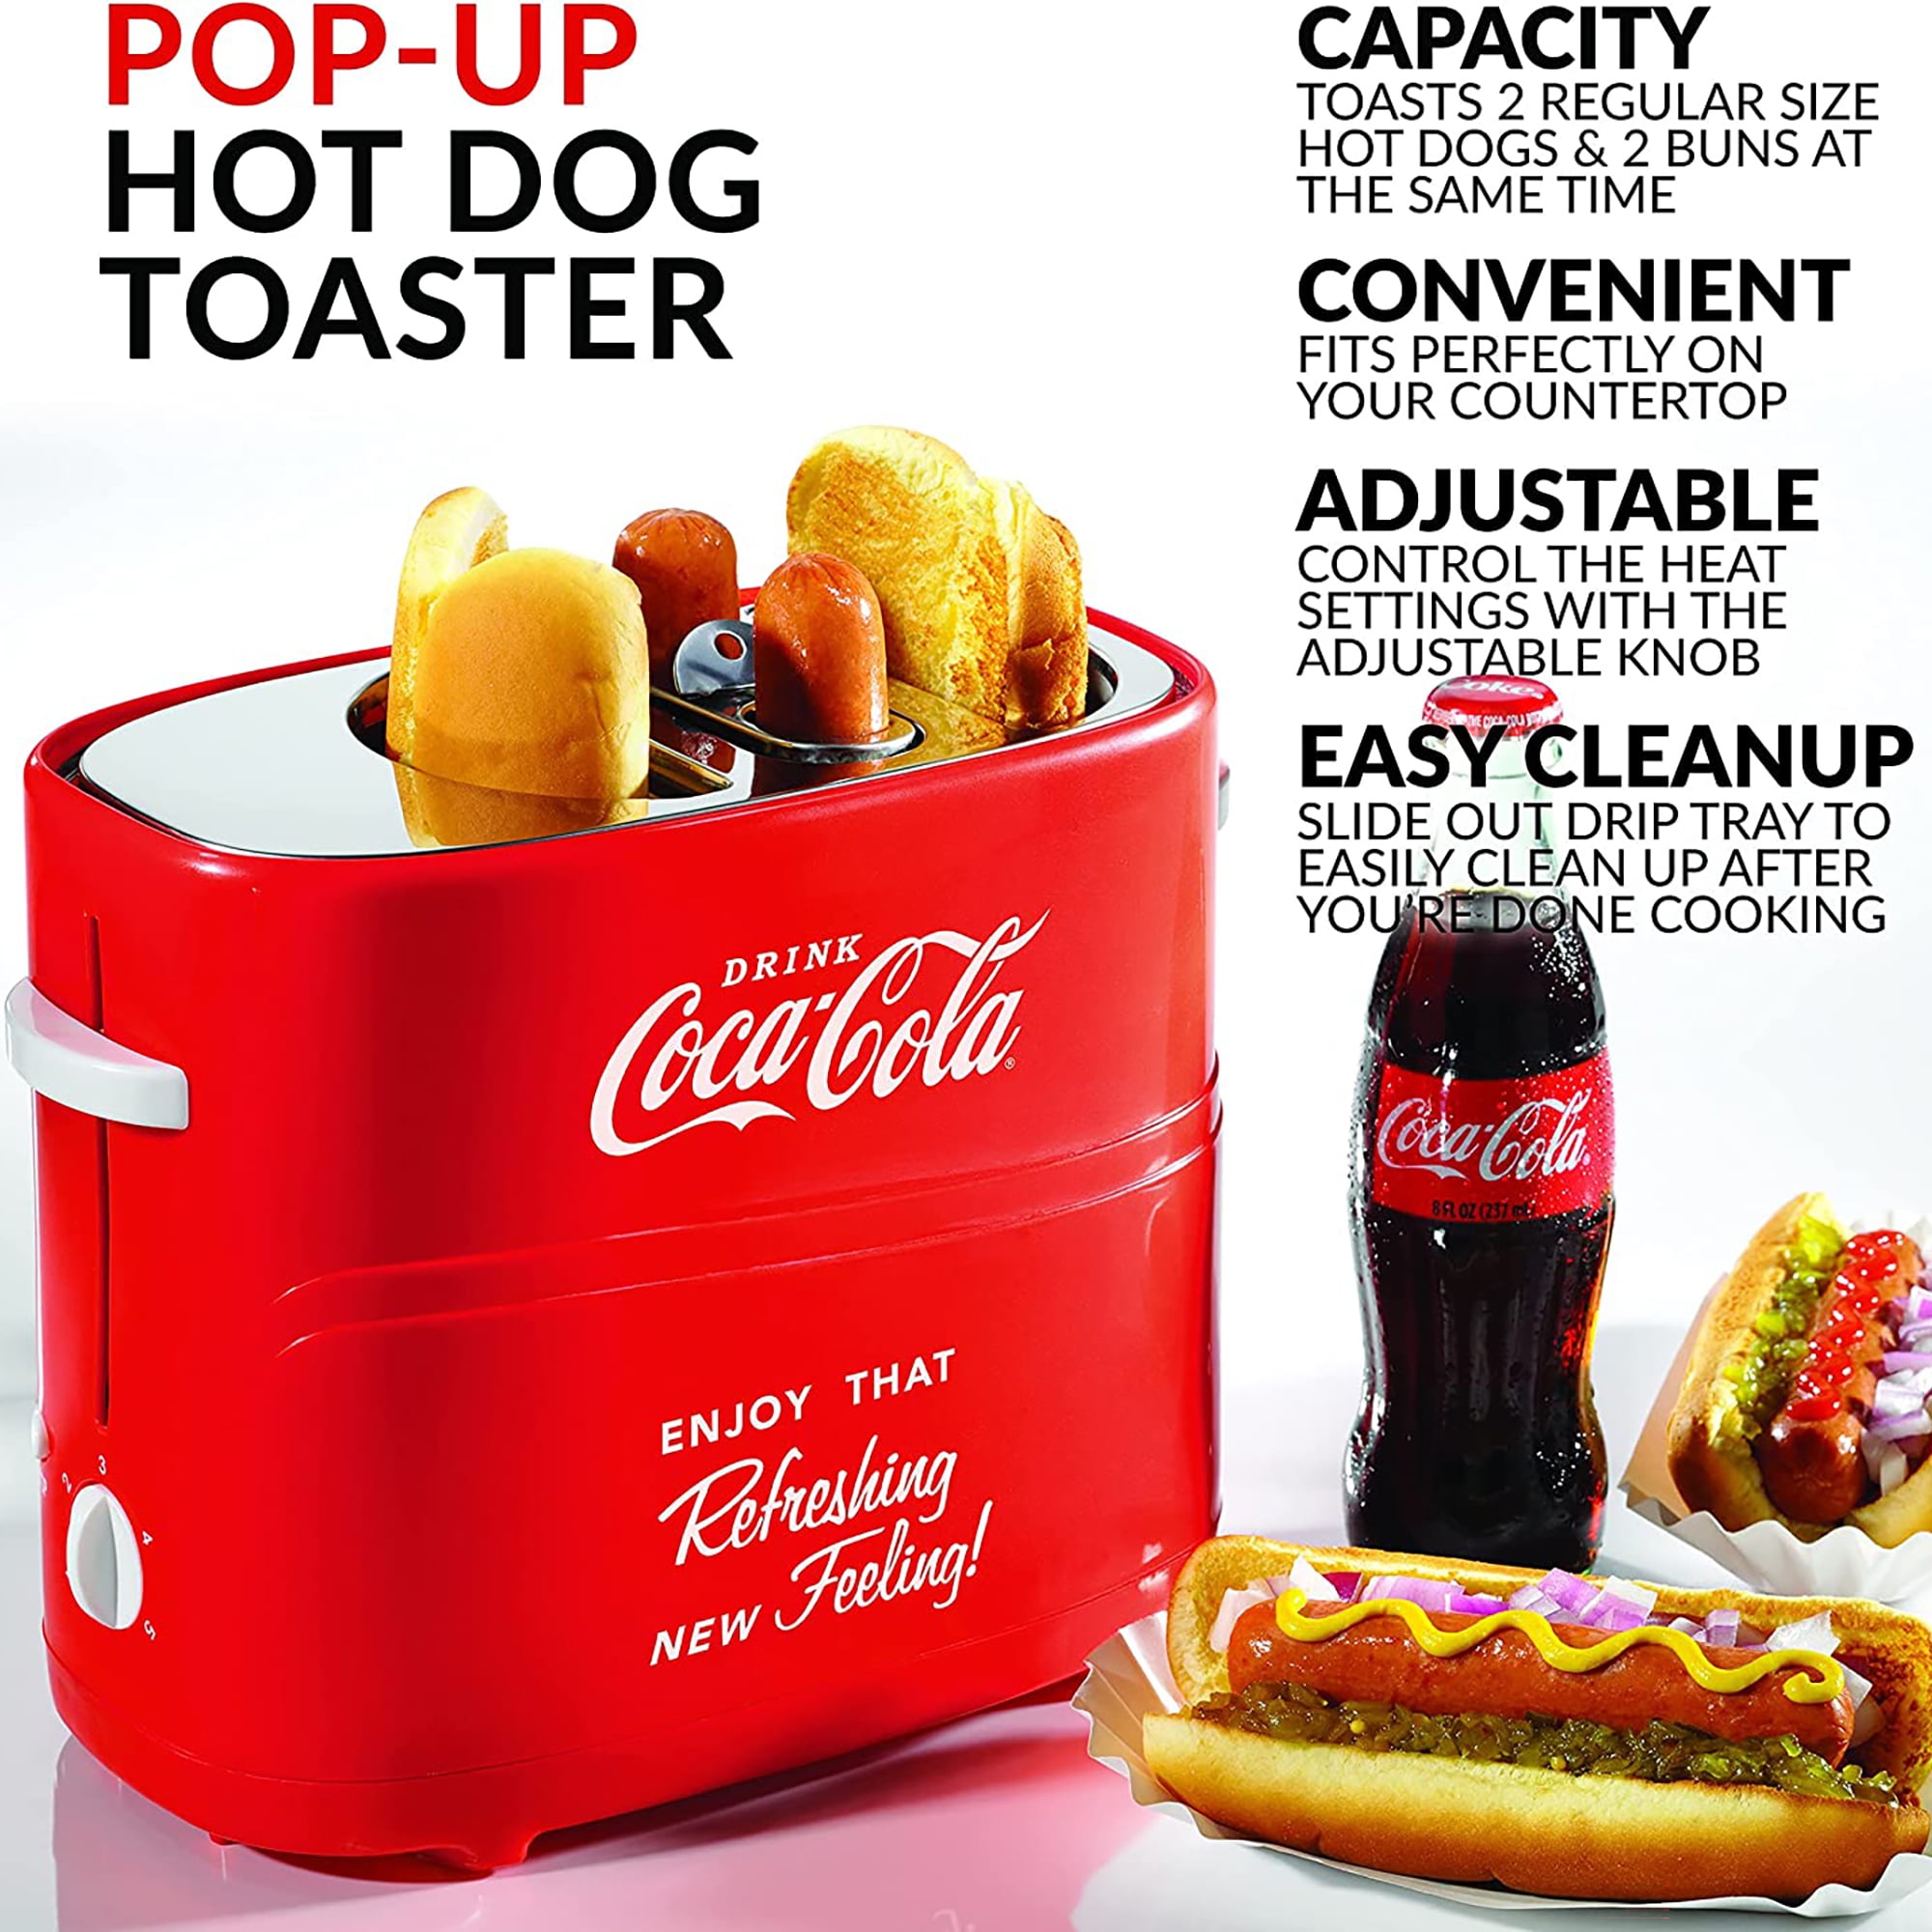 Hot Dogs (and rolls) on the Snoopy Hot Dog Toaster!! (and CONTEST!) 